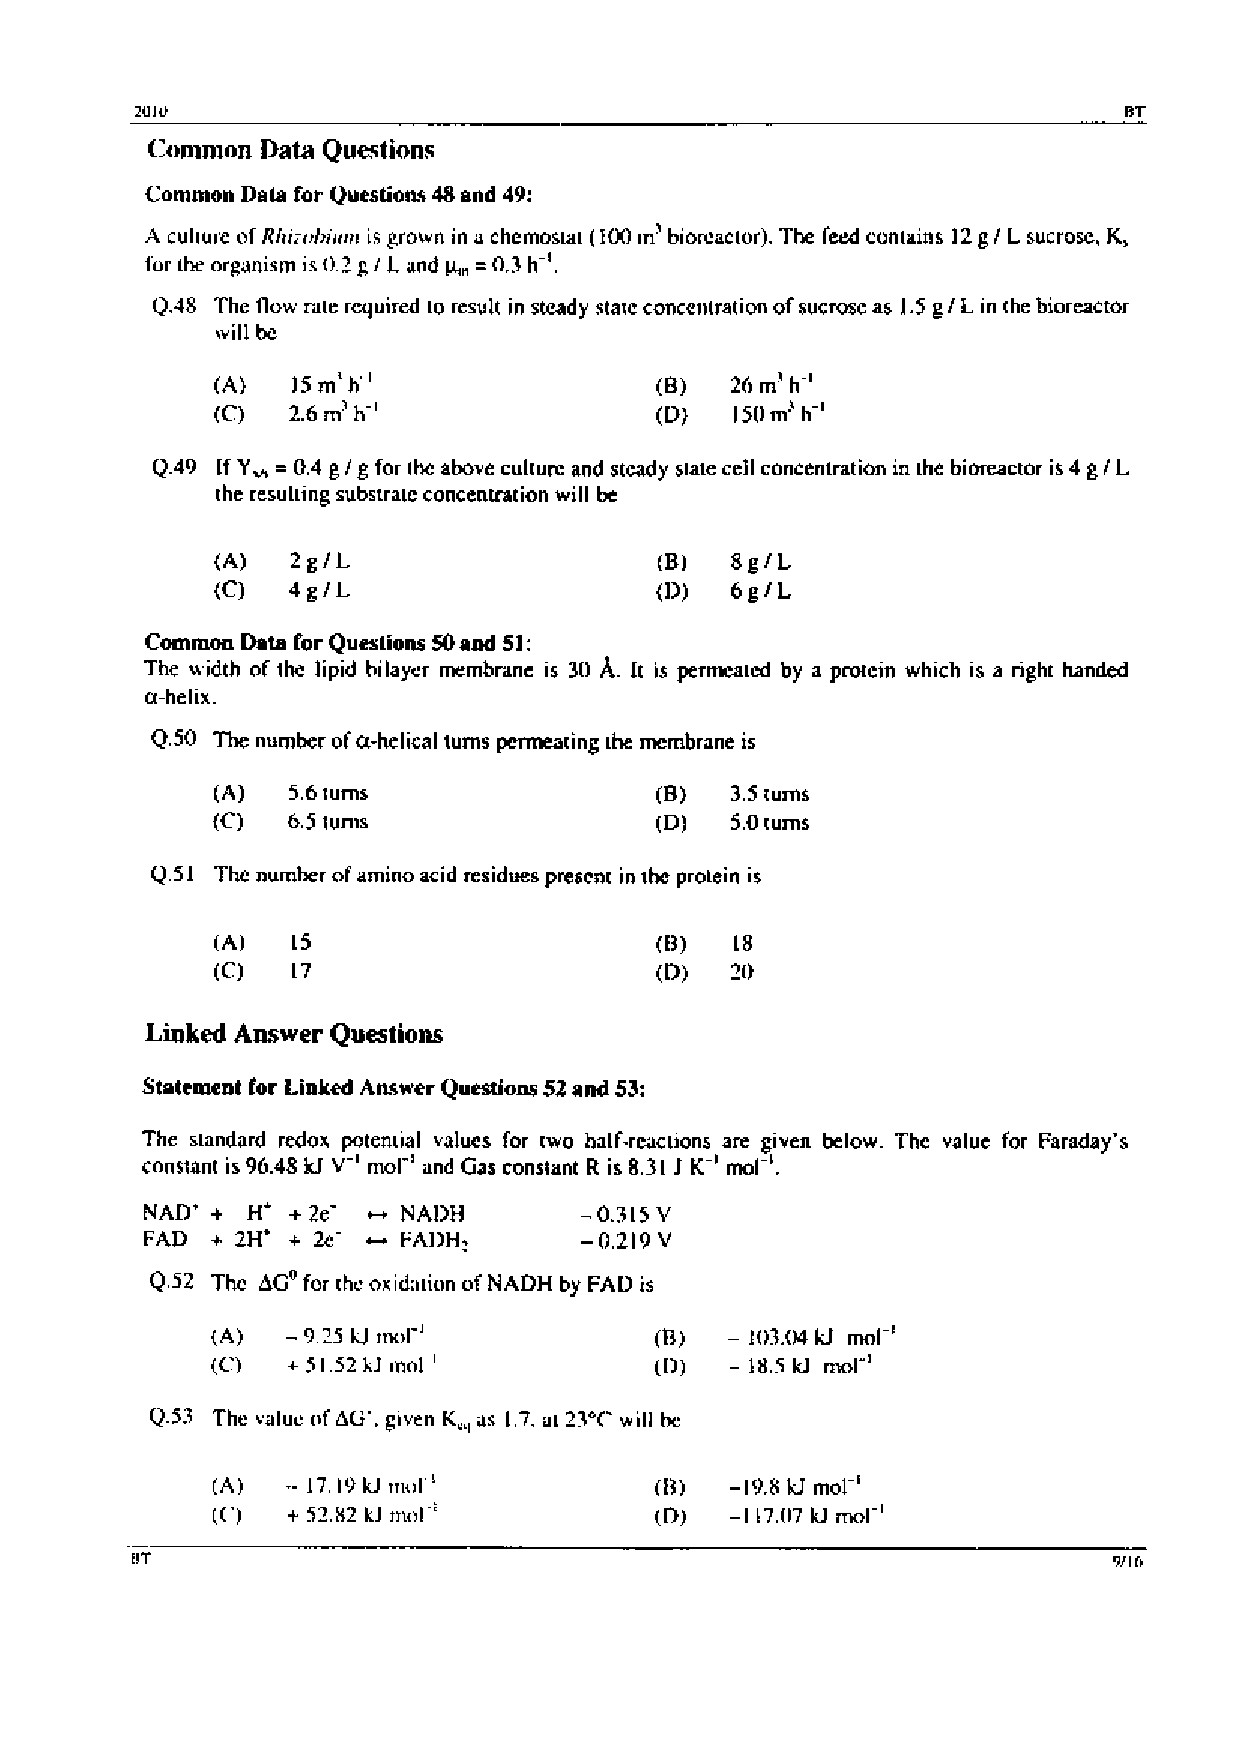 GATE Exam Question Paper 2010 Biotechnology 9